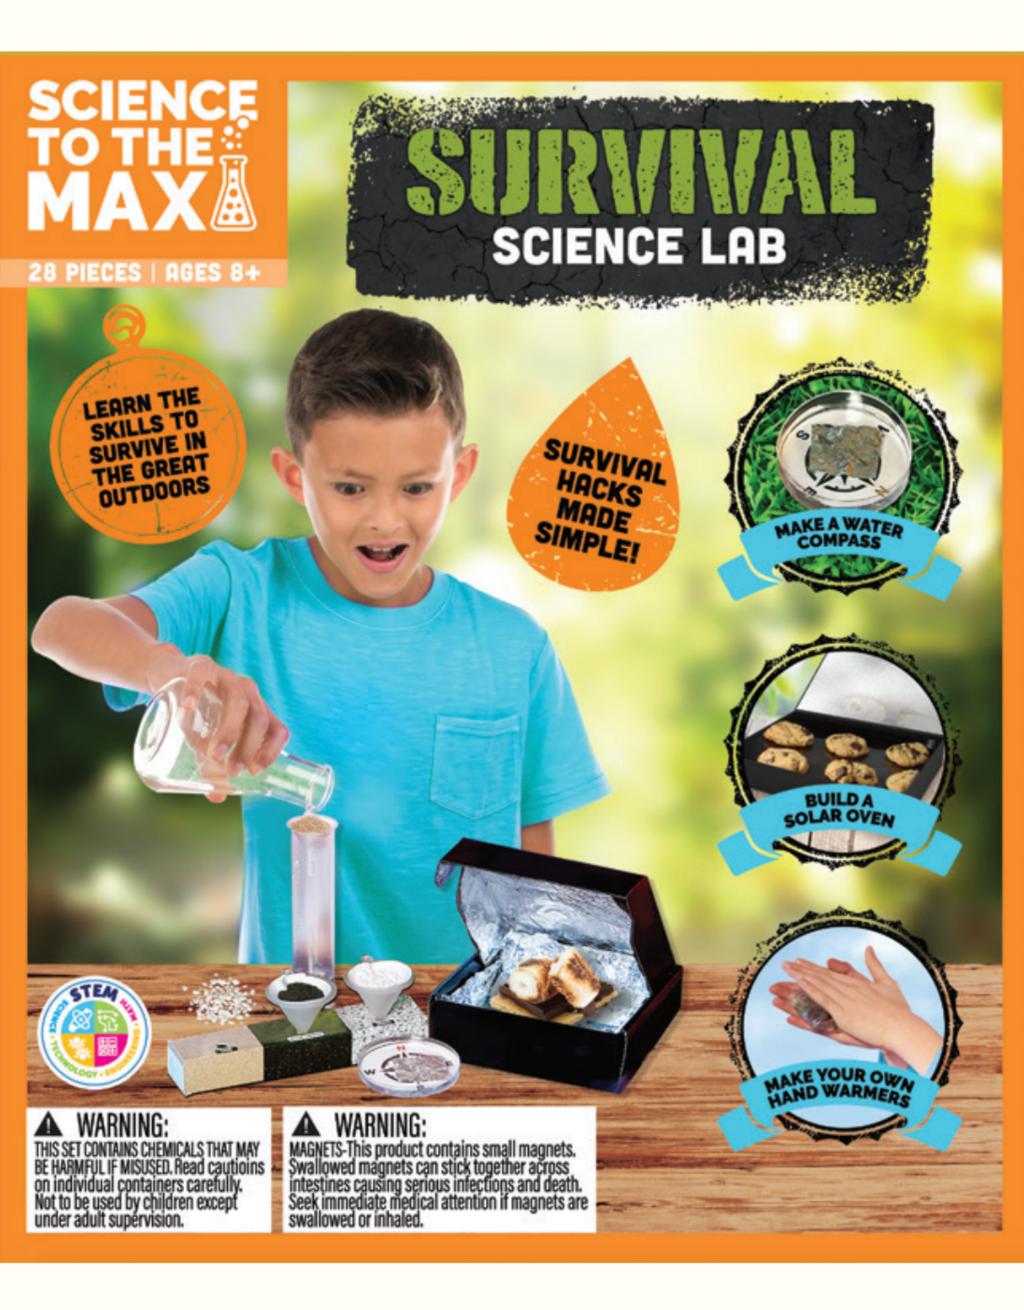 The Survival Science Lab